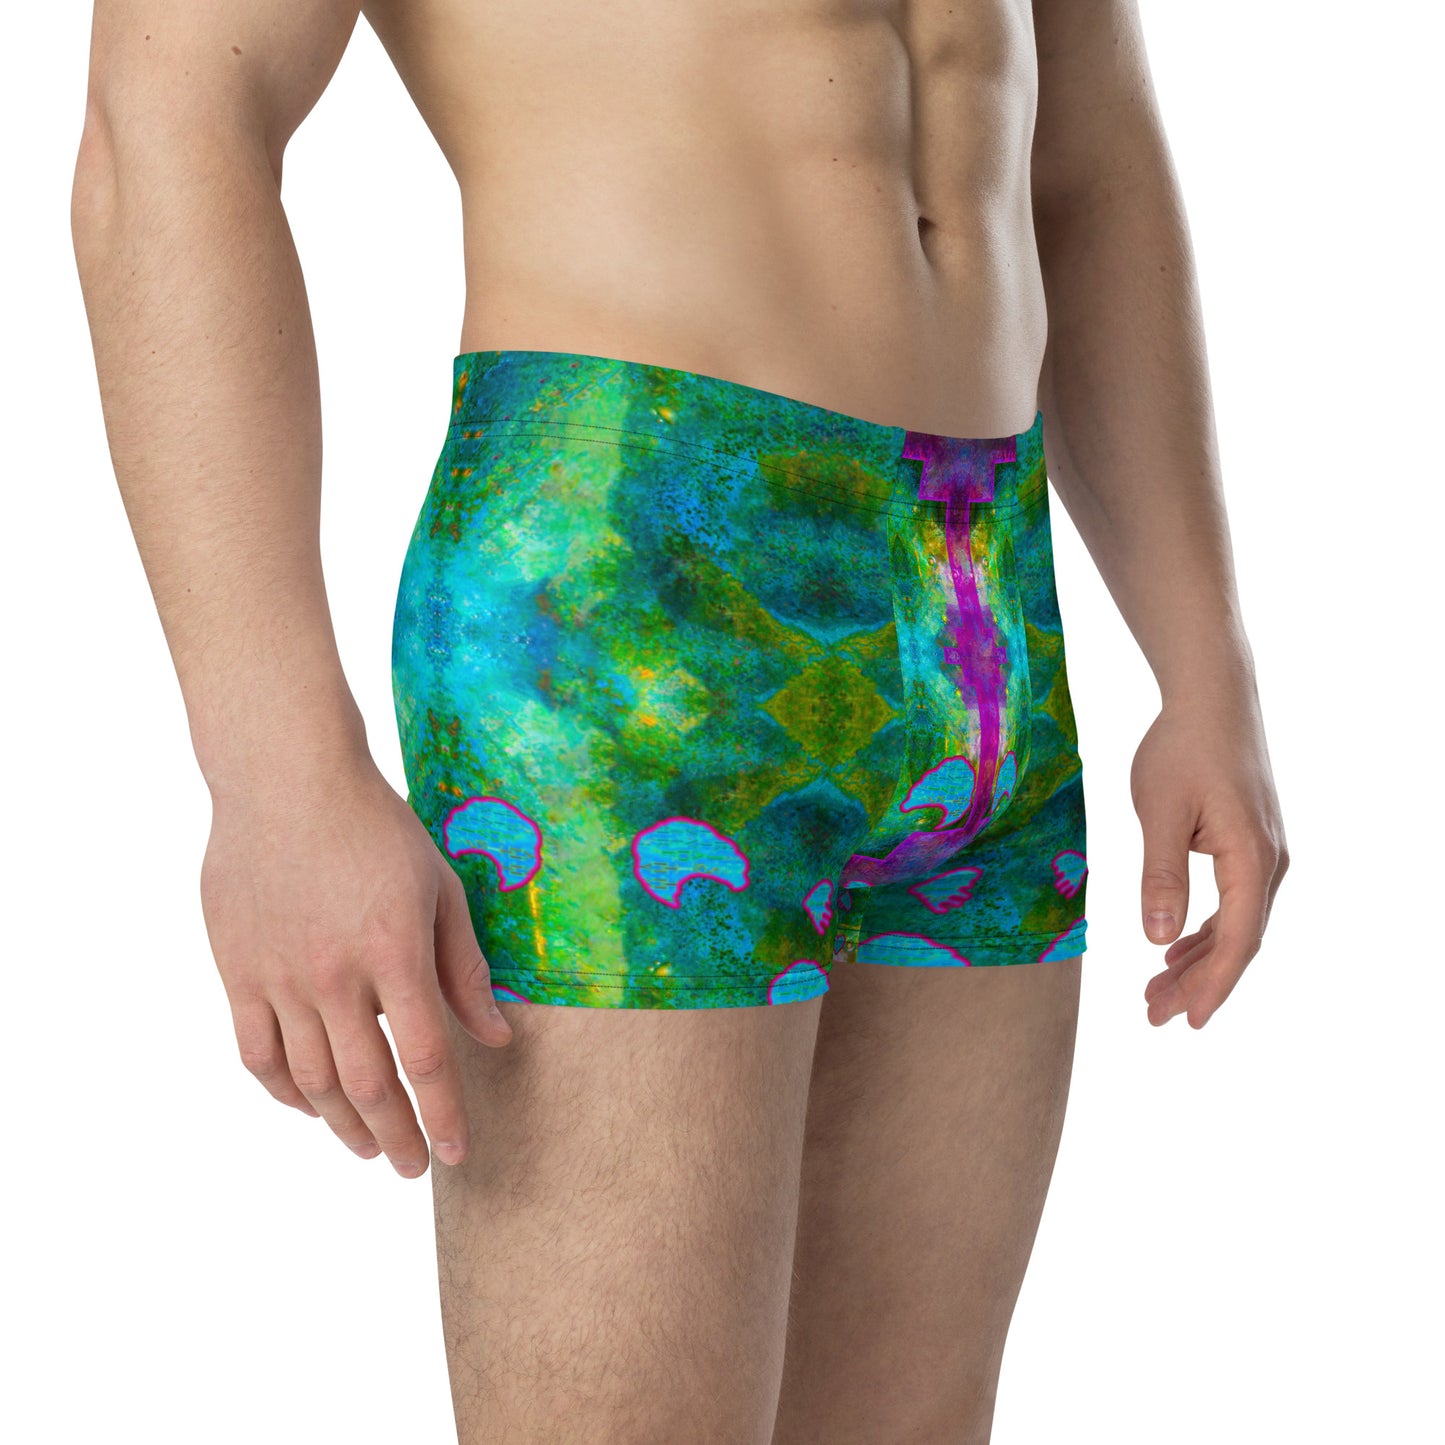 Boxer Briefs (His/They) RJSTH@Fabric#11 RJSTHW2020 RJS